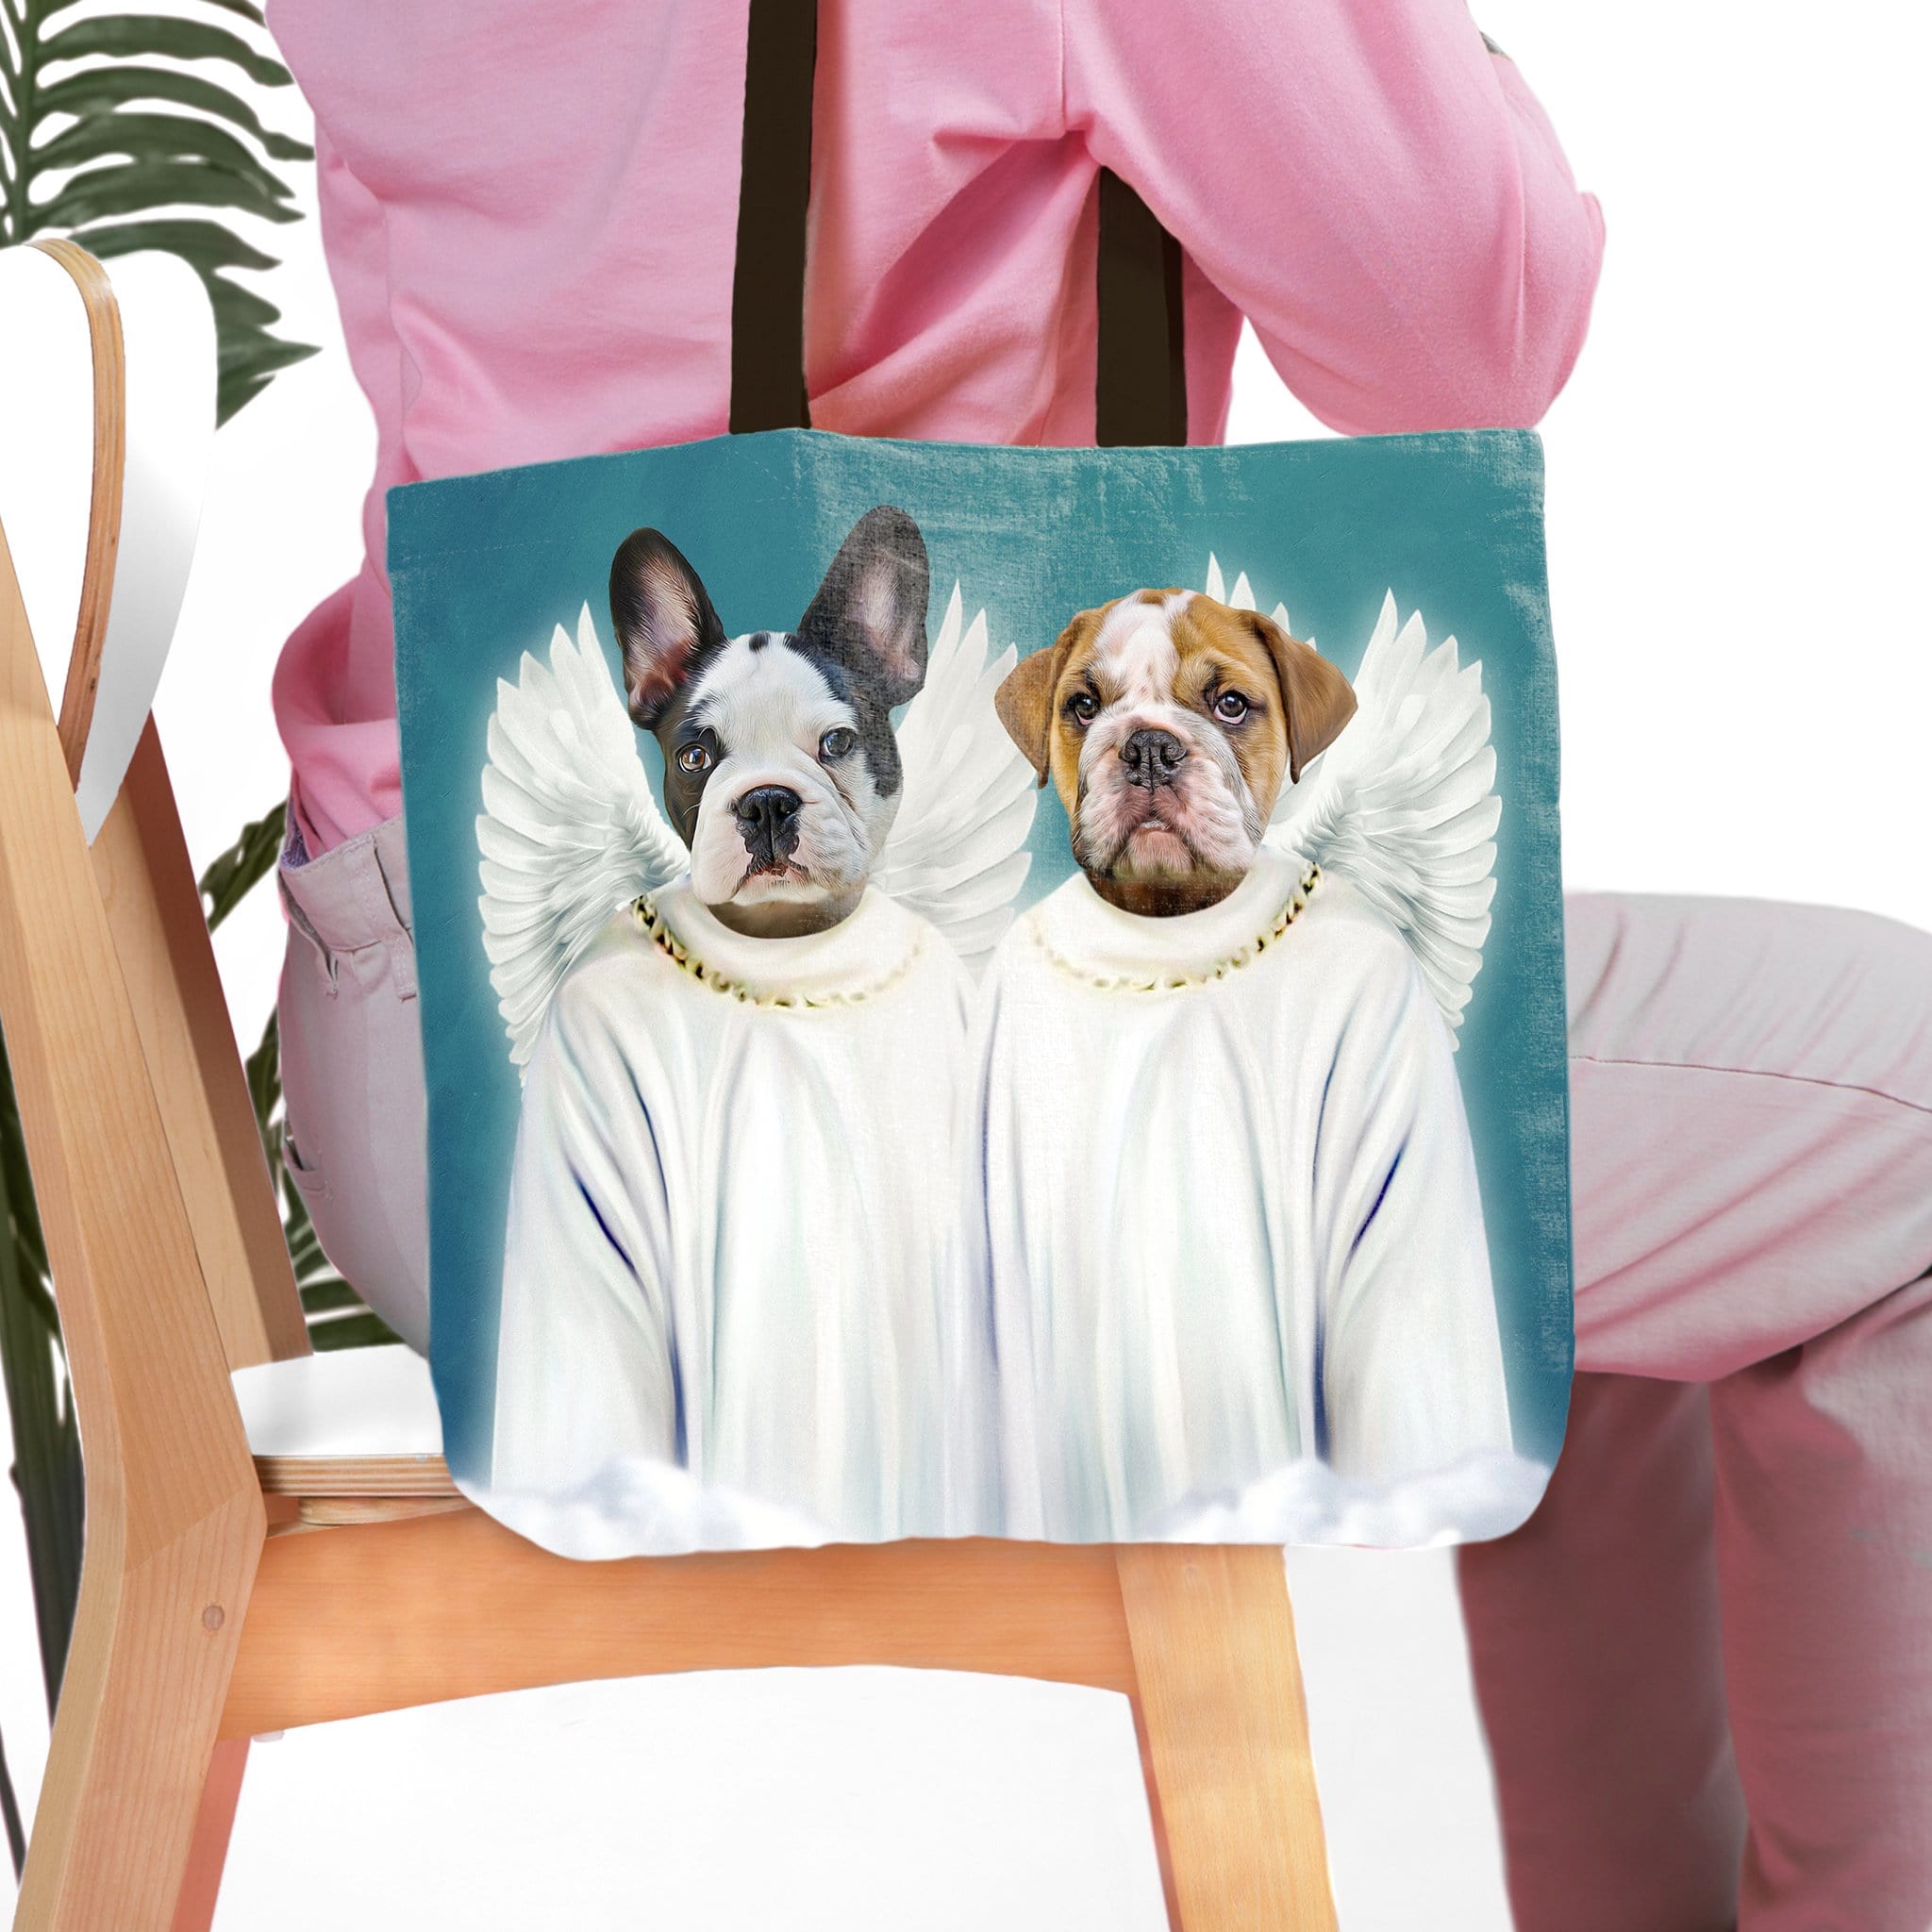 &#39;2 Angels&#39; Personalized 2 Pet Tote Bag